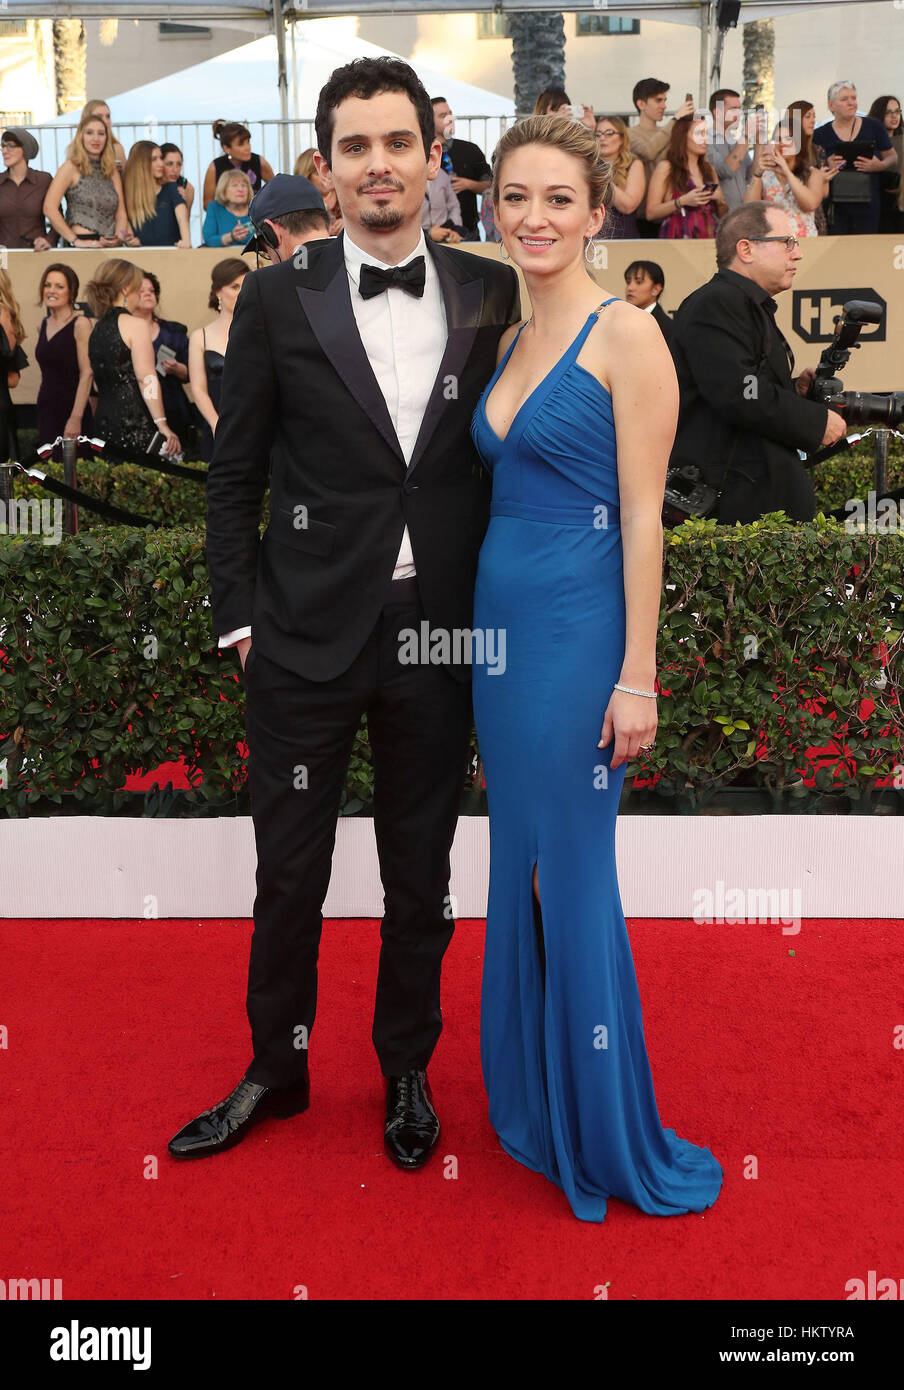 Los Angeles, CA, USA. 29th Jan, 2017. 29 January 2017 - Los Angeles, California - Damien Chazelle. 23rd Annual Screen Actors Guild Awards held at The Shrine Expo Hall. Photo Credit: F. Sadou/AdMedia Credit: F. Sadou/AdMedia/ZUMA Wire/Alamy Live News Stock Photo